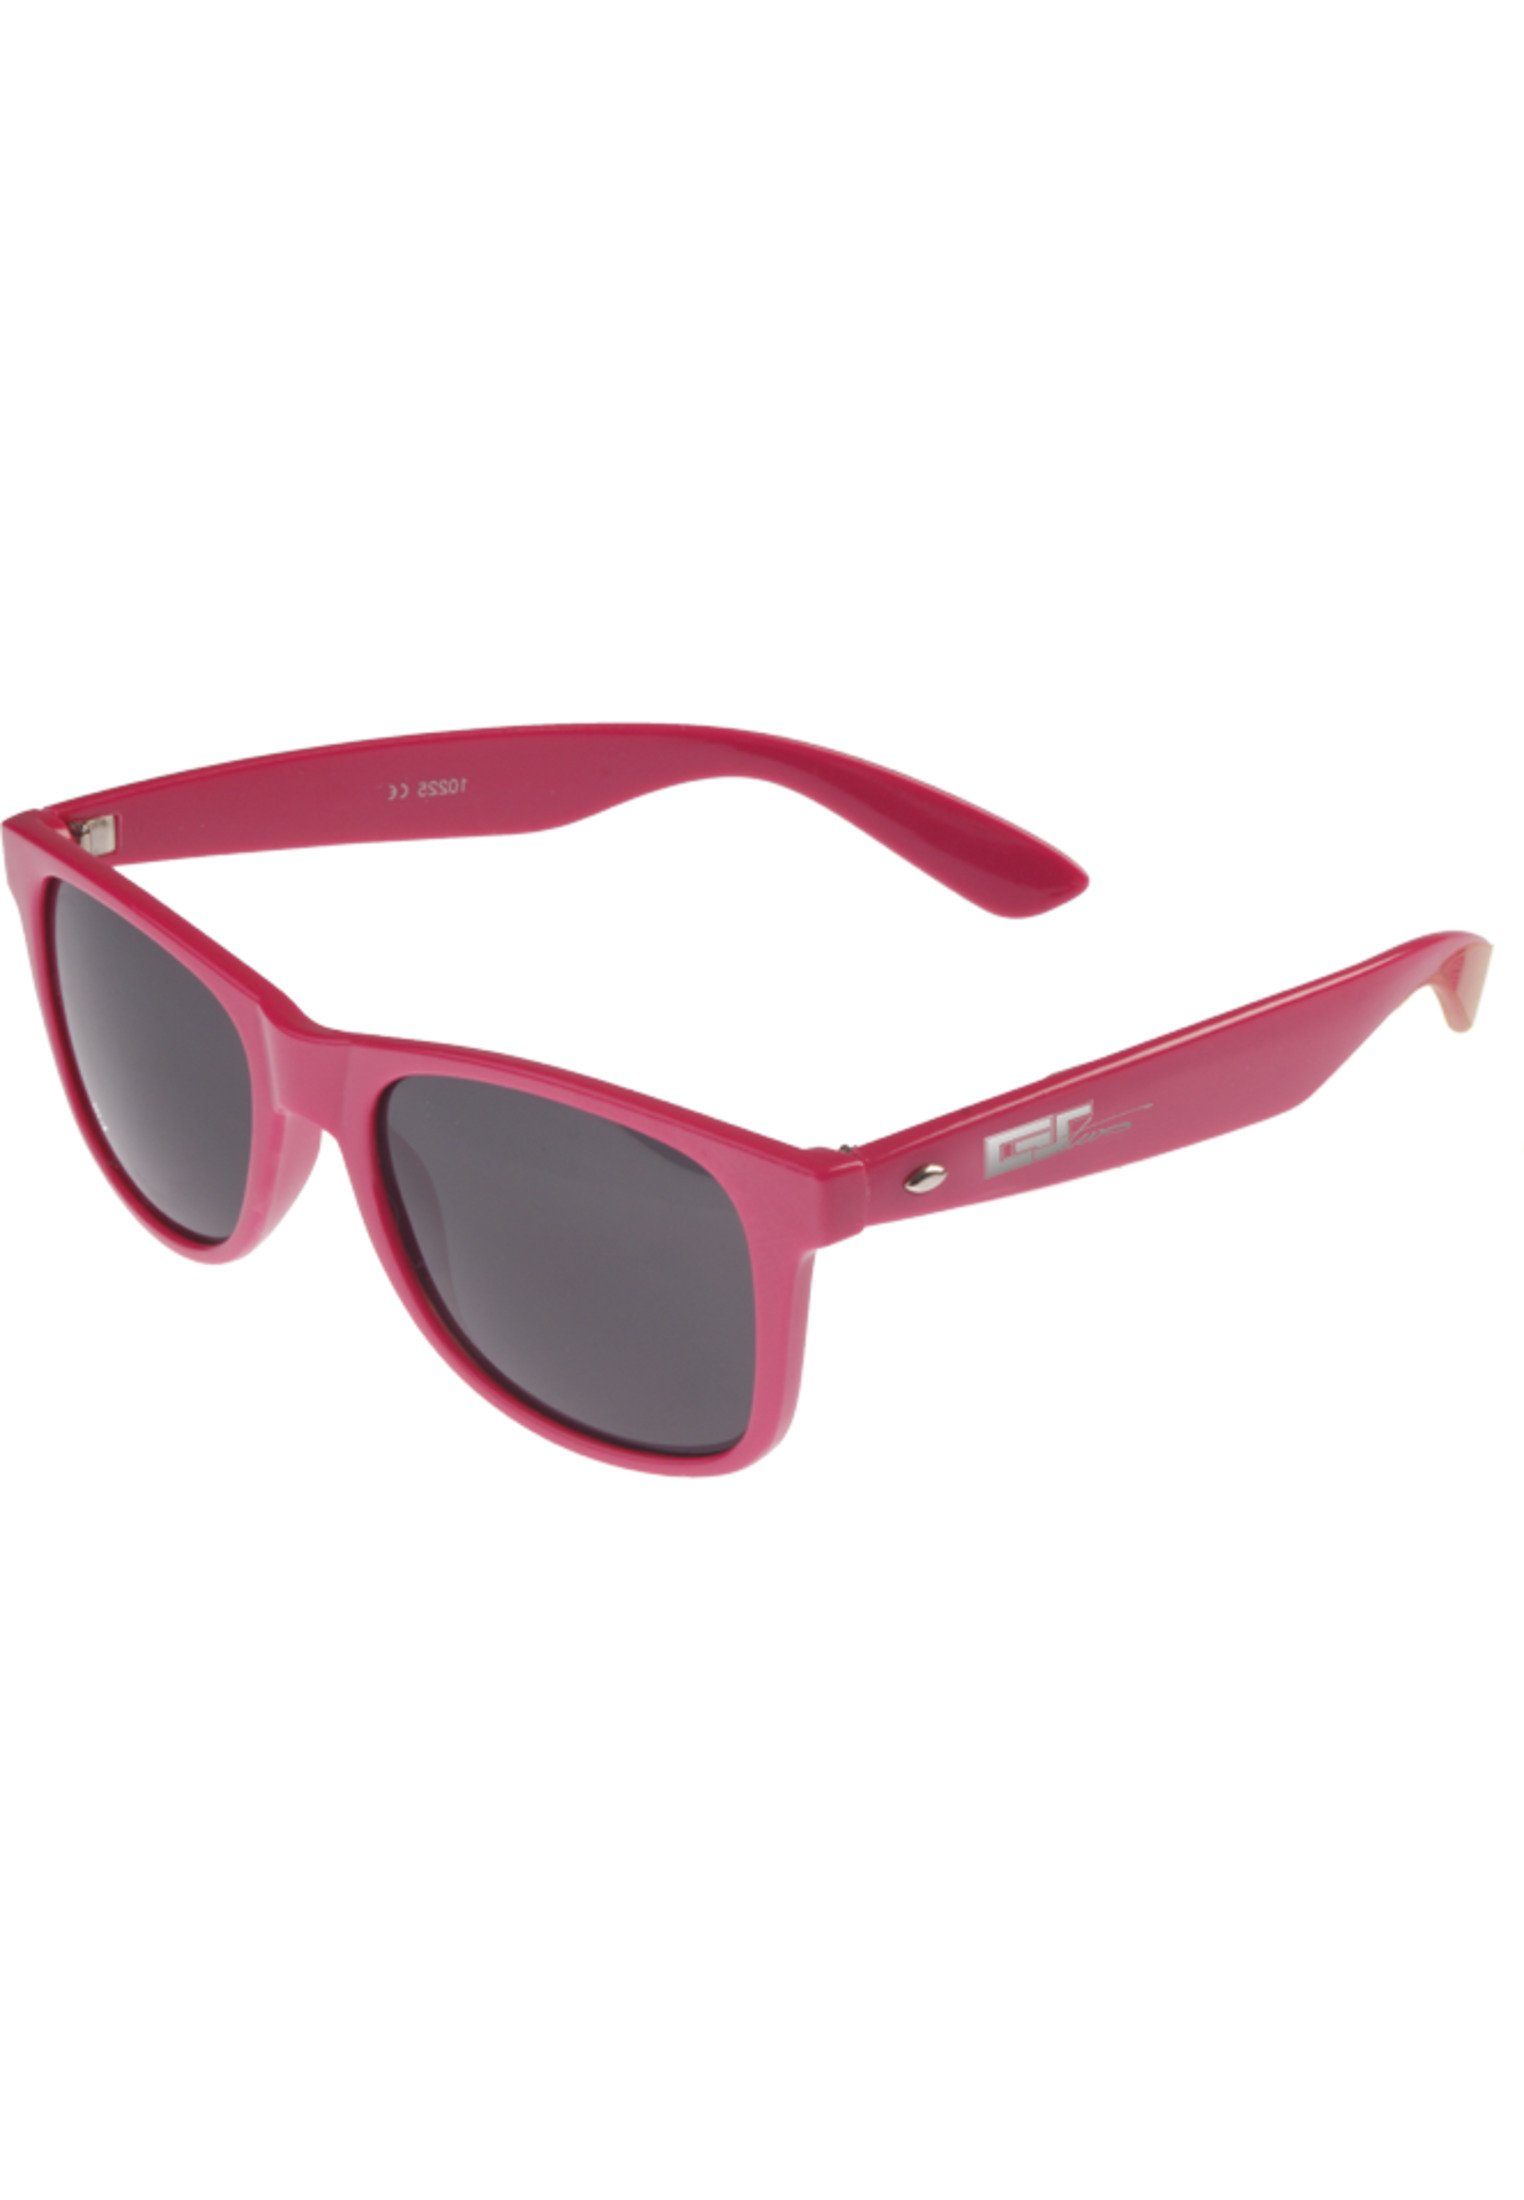 GStwo Shades MSTRDS Sonnenbrille magenta Accessoires Groove